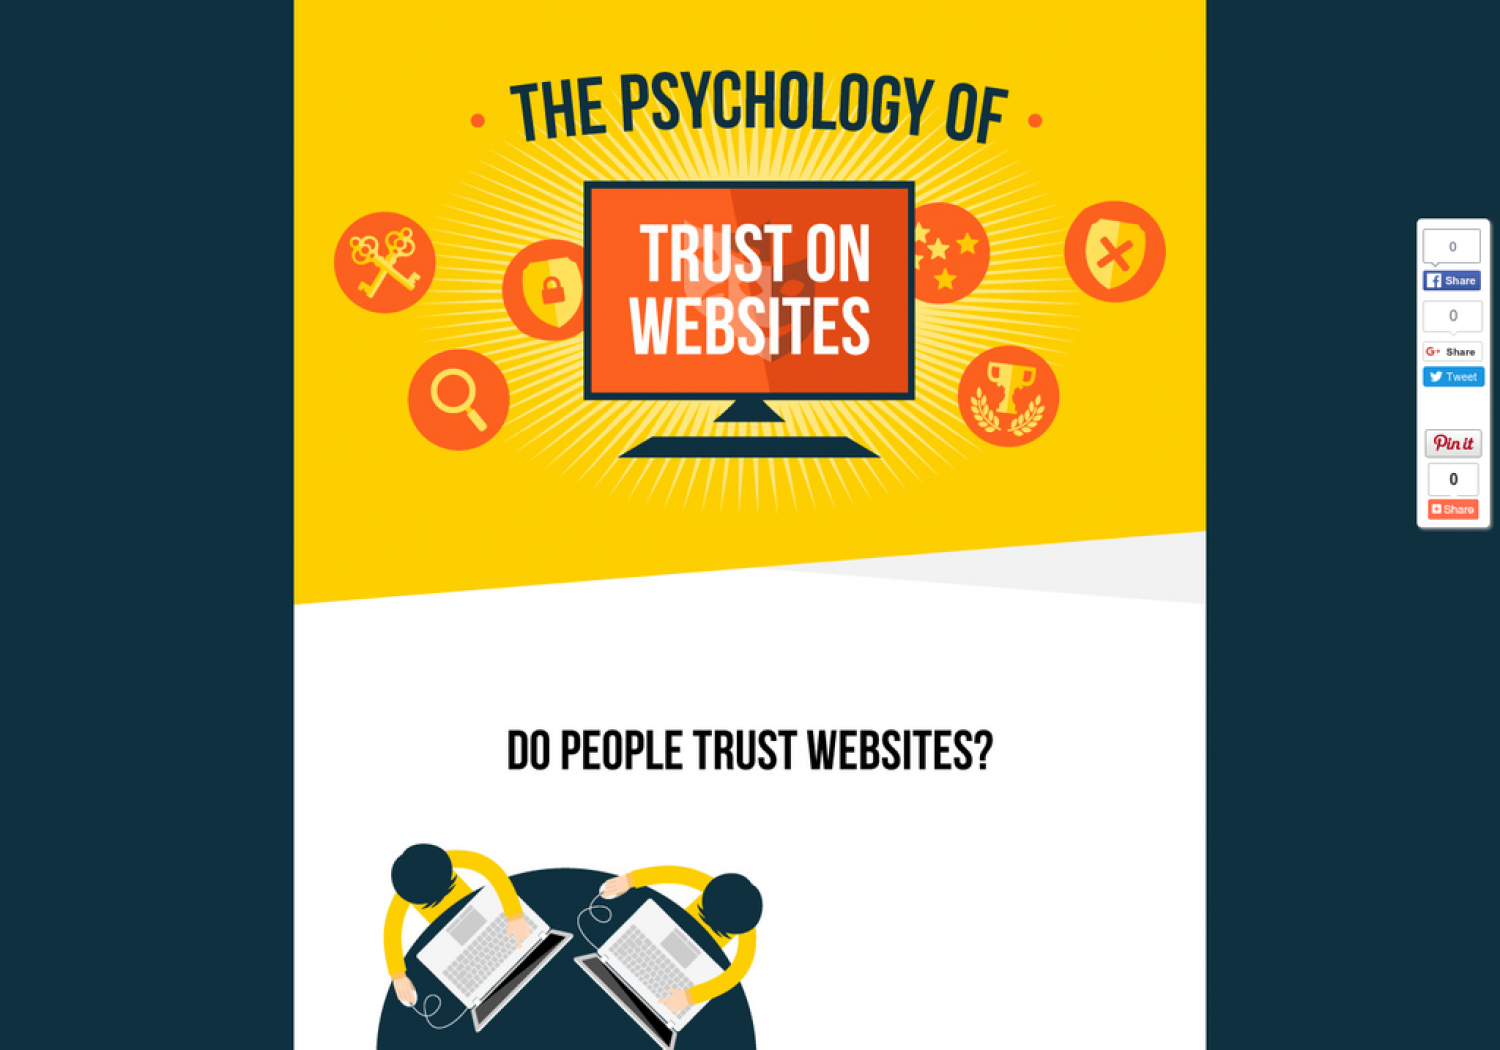 The Psychology of Trust on Websites Infographic